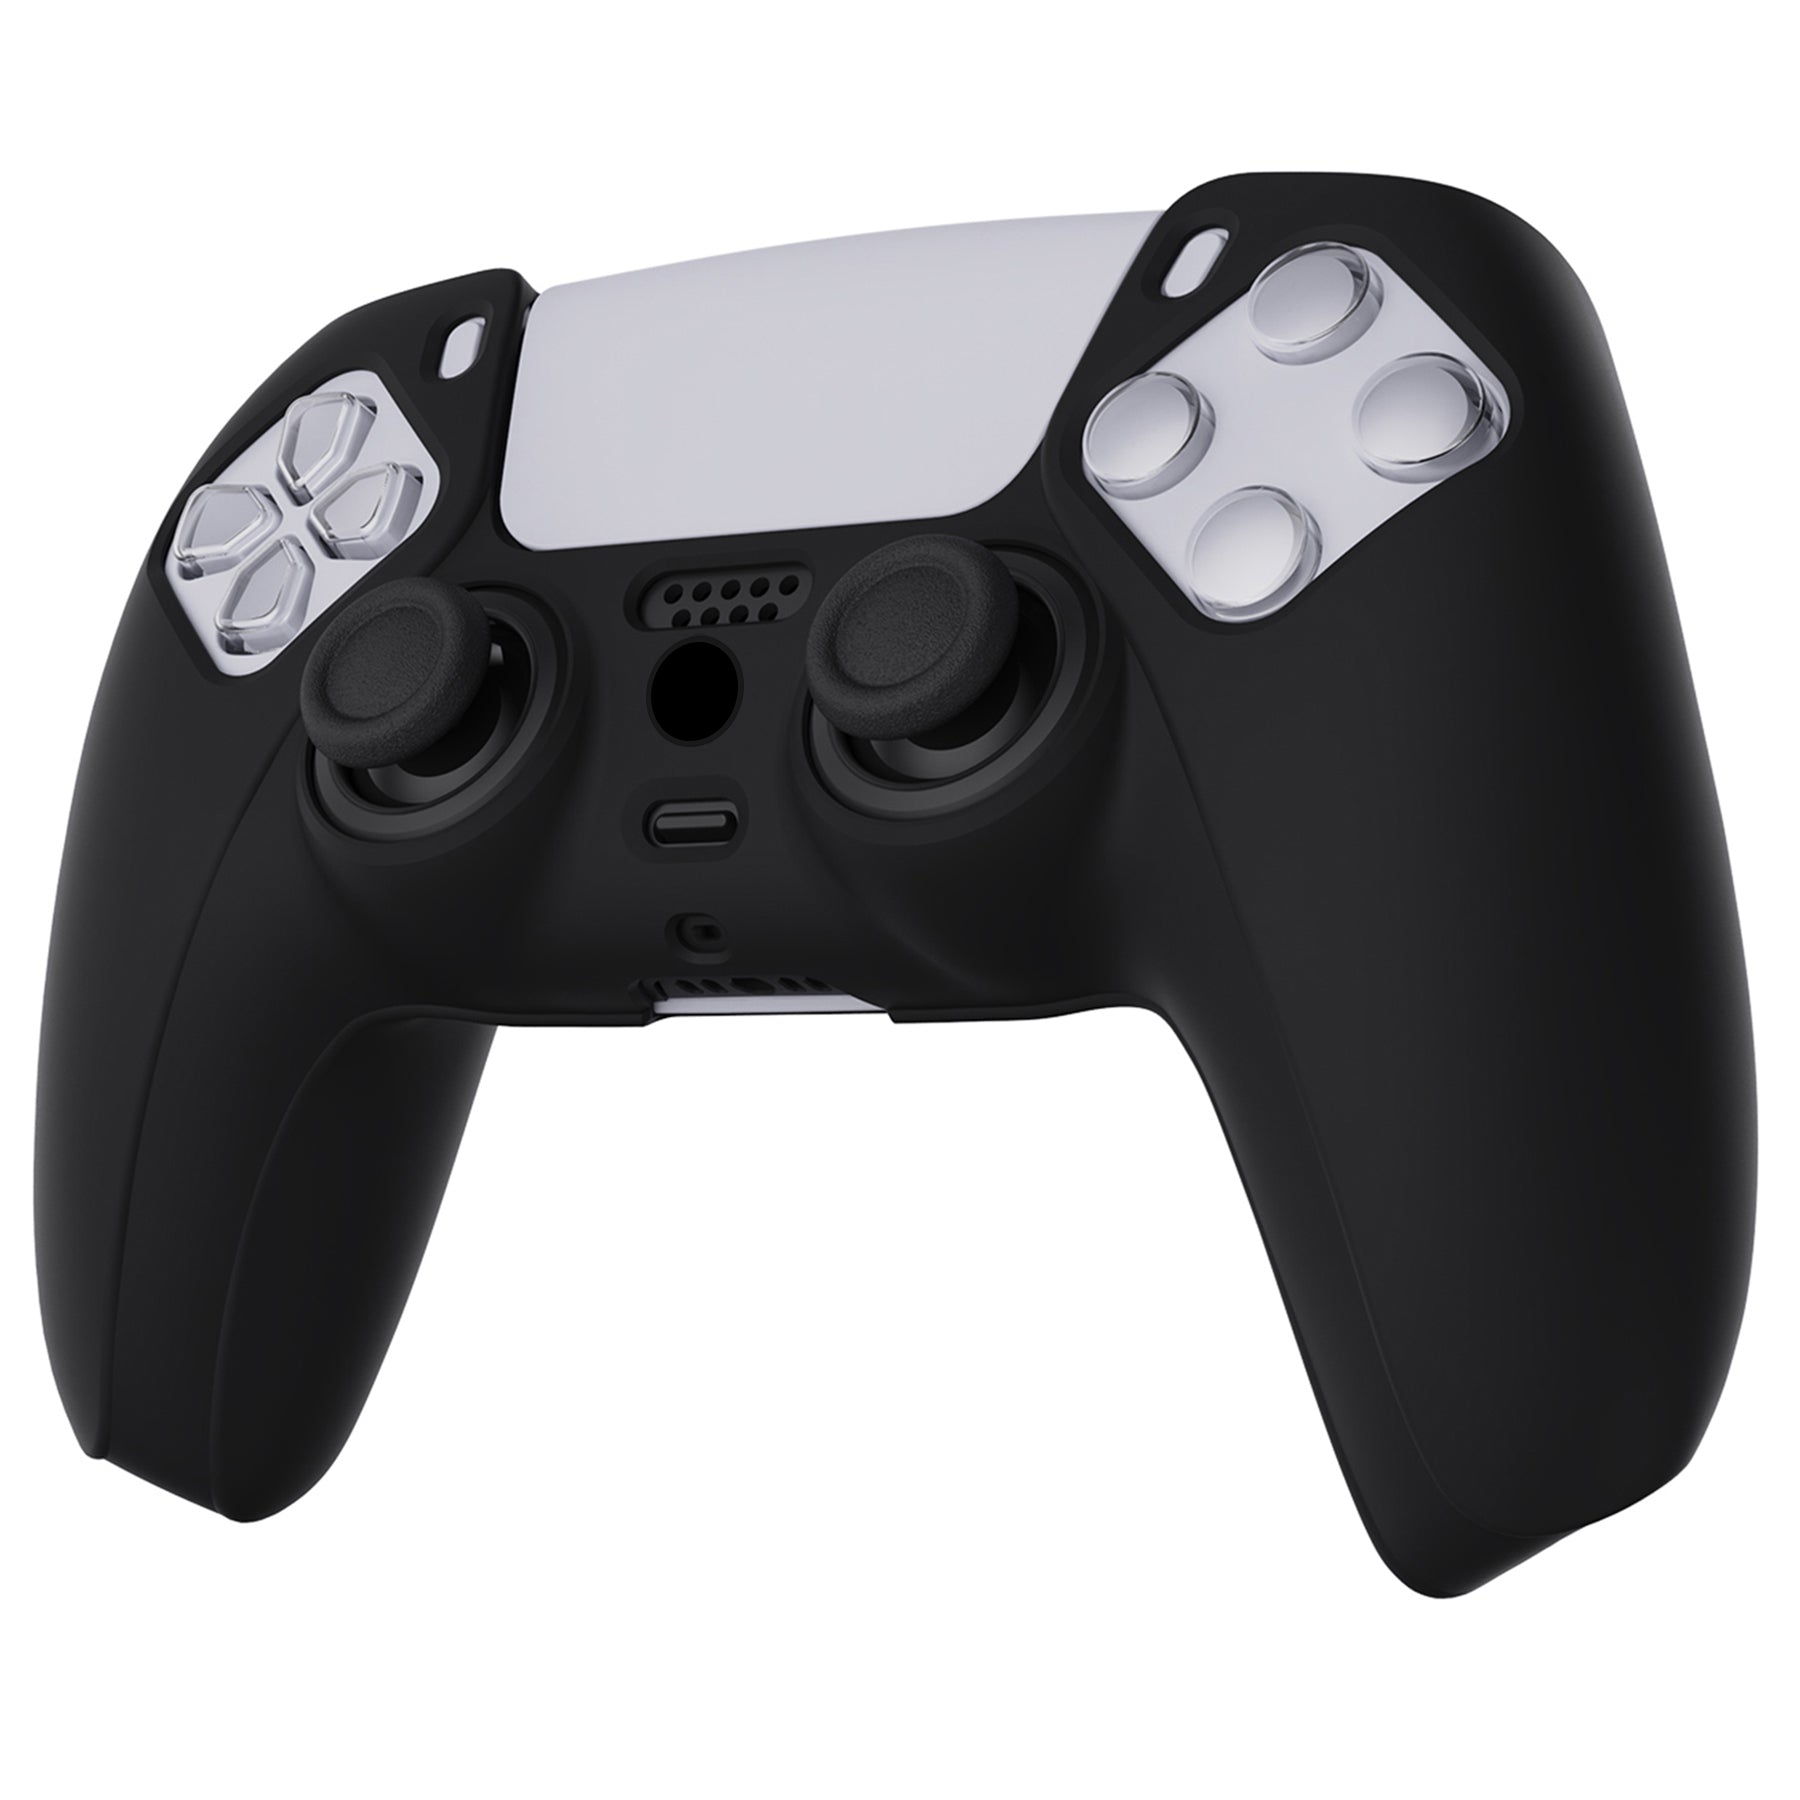 PlayVital Pure Series Anti-Slip Silicone Cover Skin with Thumb Grip Caps for PS5 Wireless Controller - Black - KOPF001 PlayVital